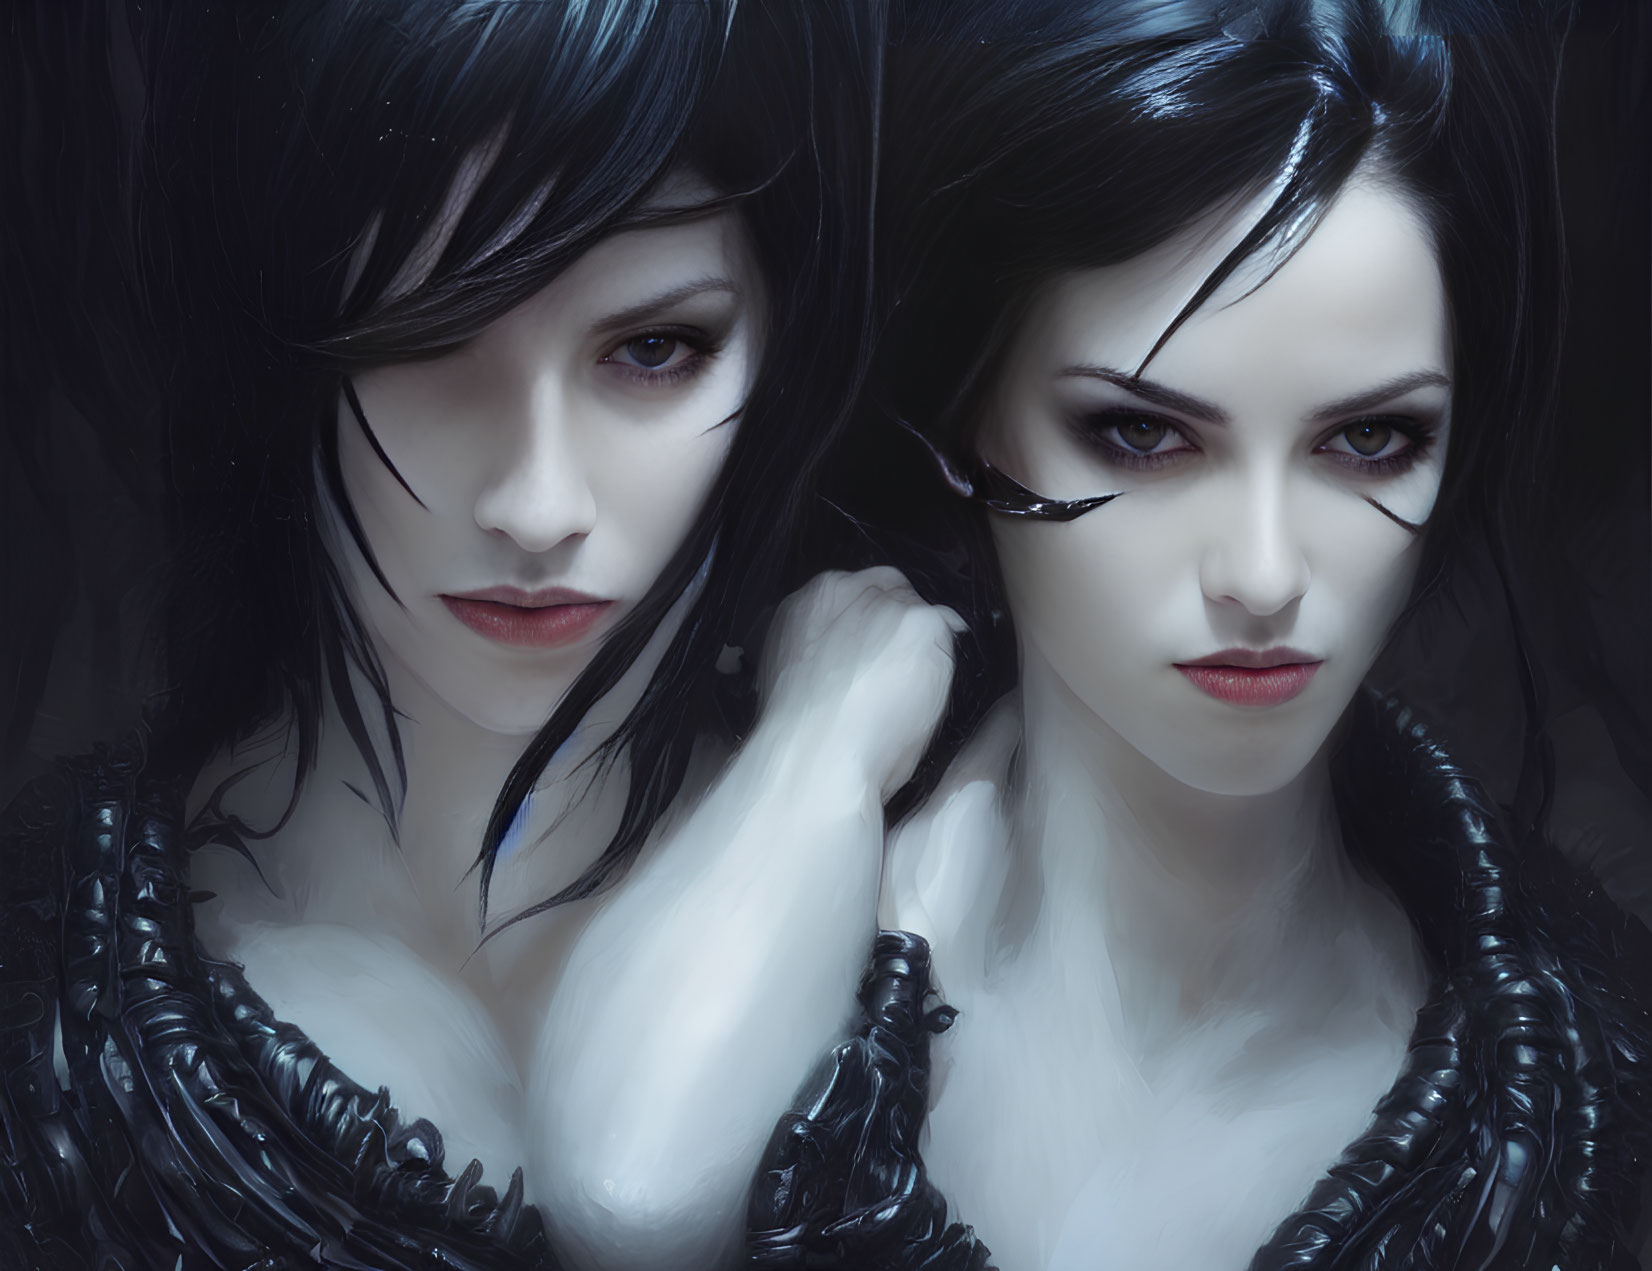 Two pale women in dark eye makeup and feathery attire with intense gazes